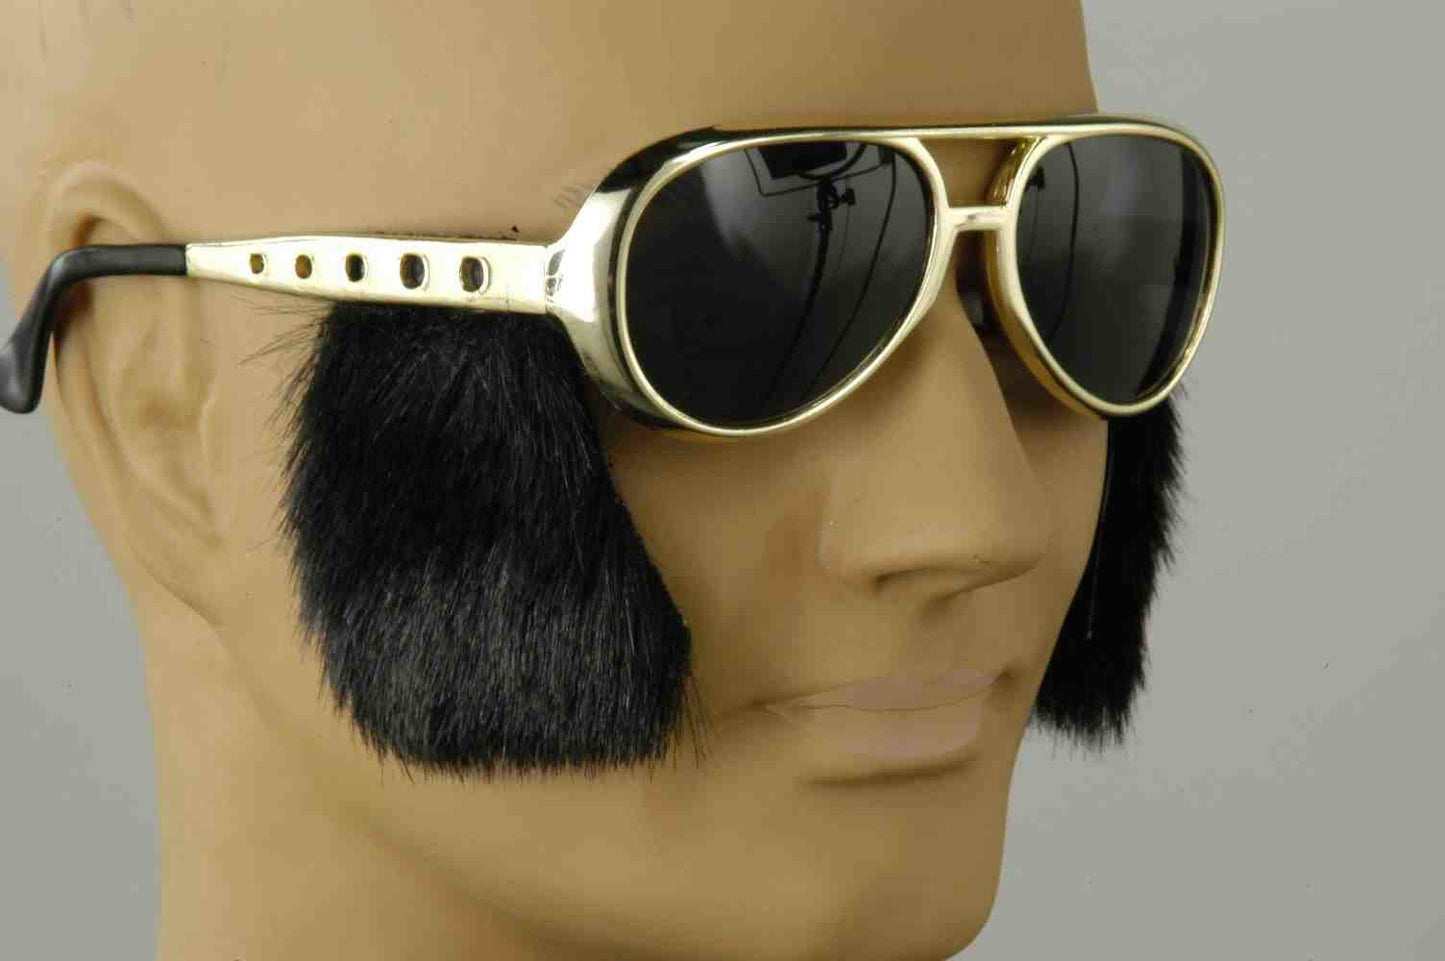 Elvis Glasses with SideBurns